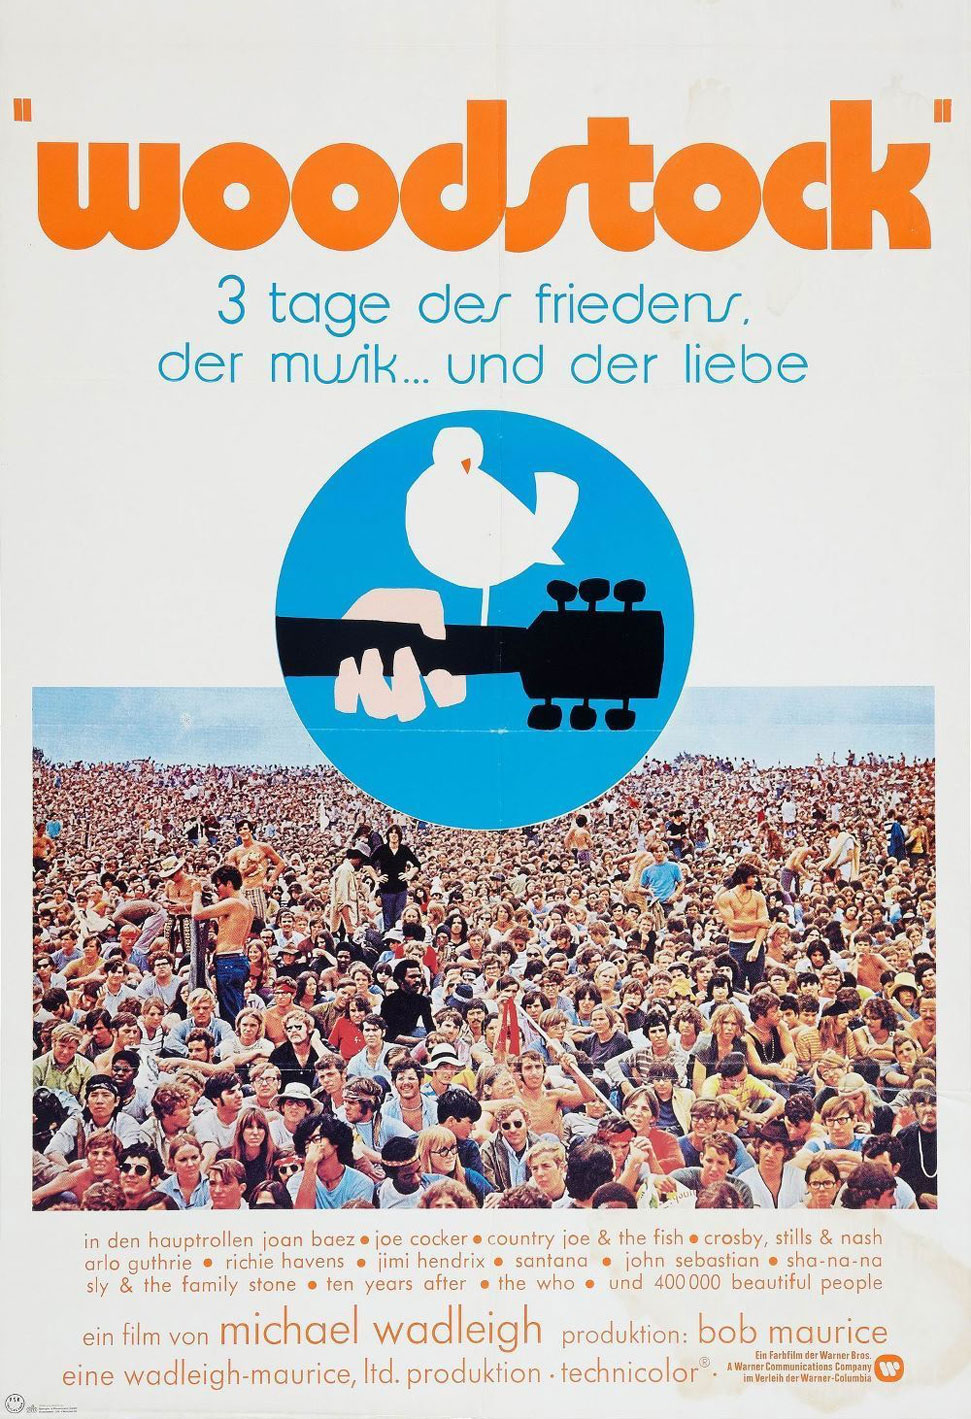 Woodstock movie posters - Fonts In Use